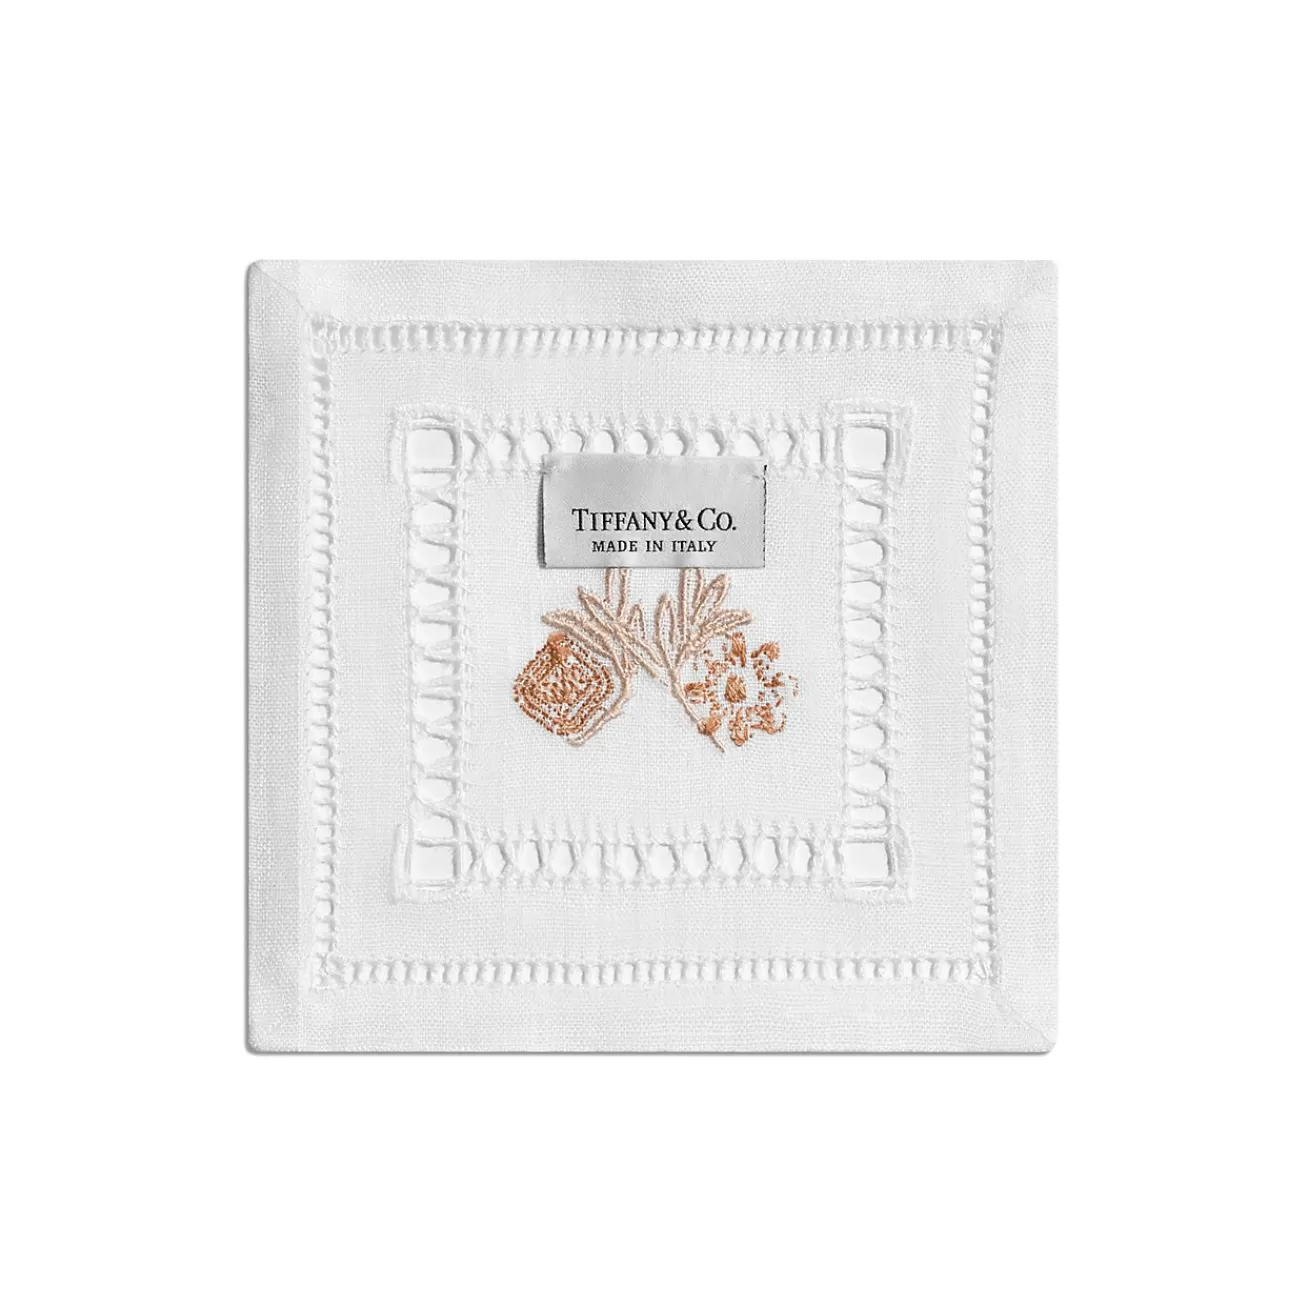 Tiffany & Co. Tiffany Heritage Coasters Set of Four, in Carnelian Linen | ^ Table Linens